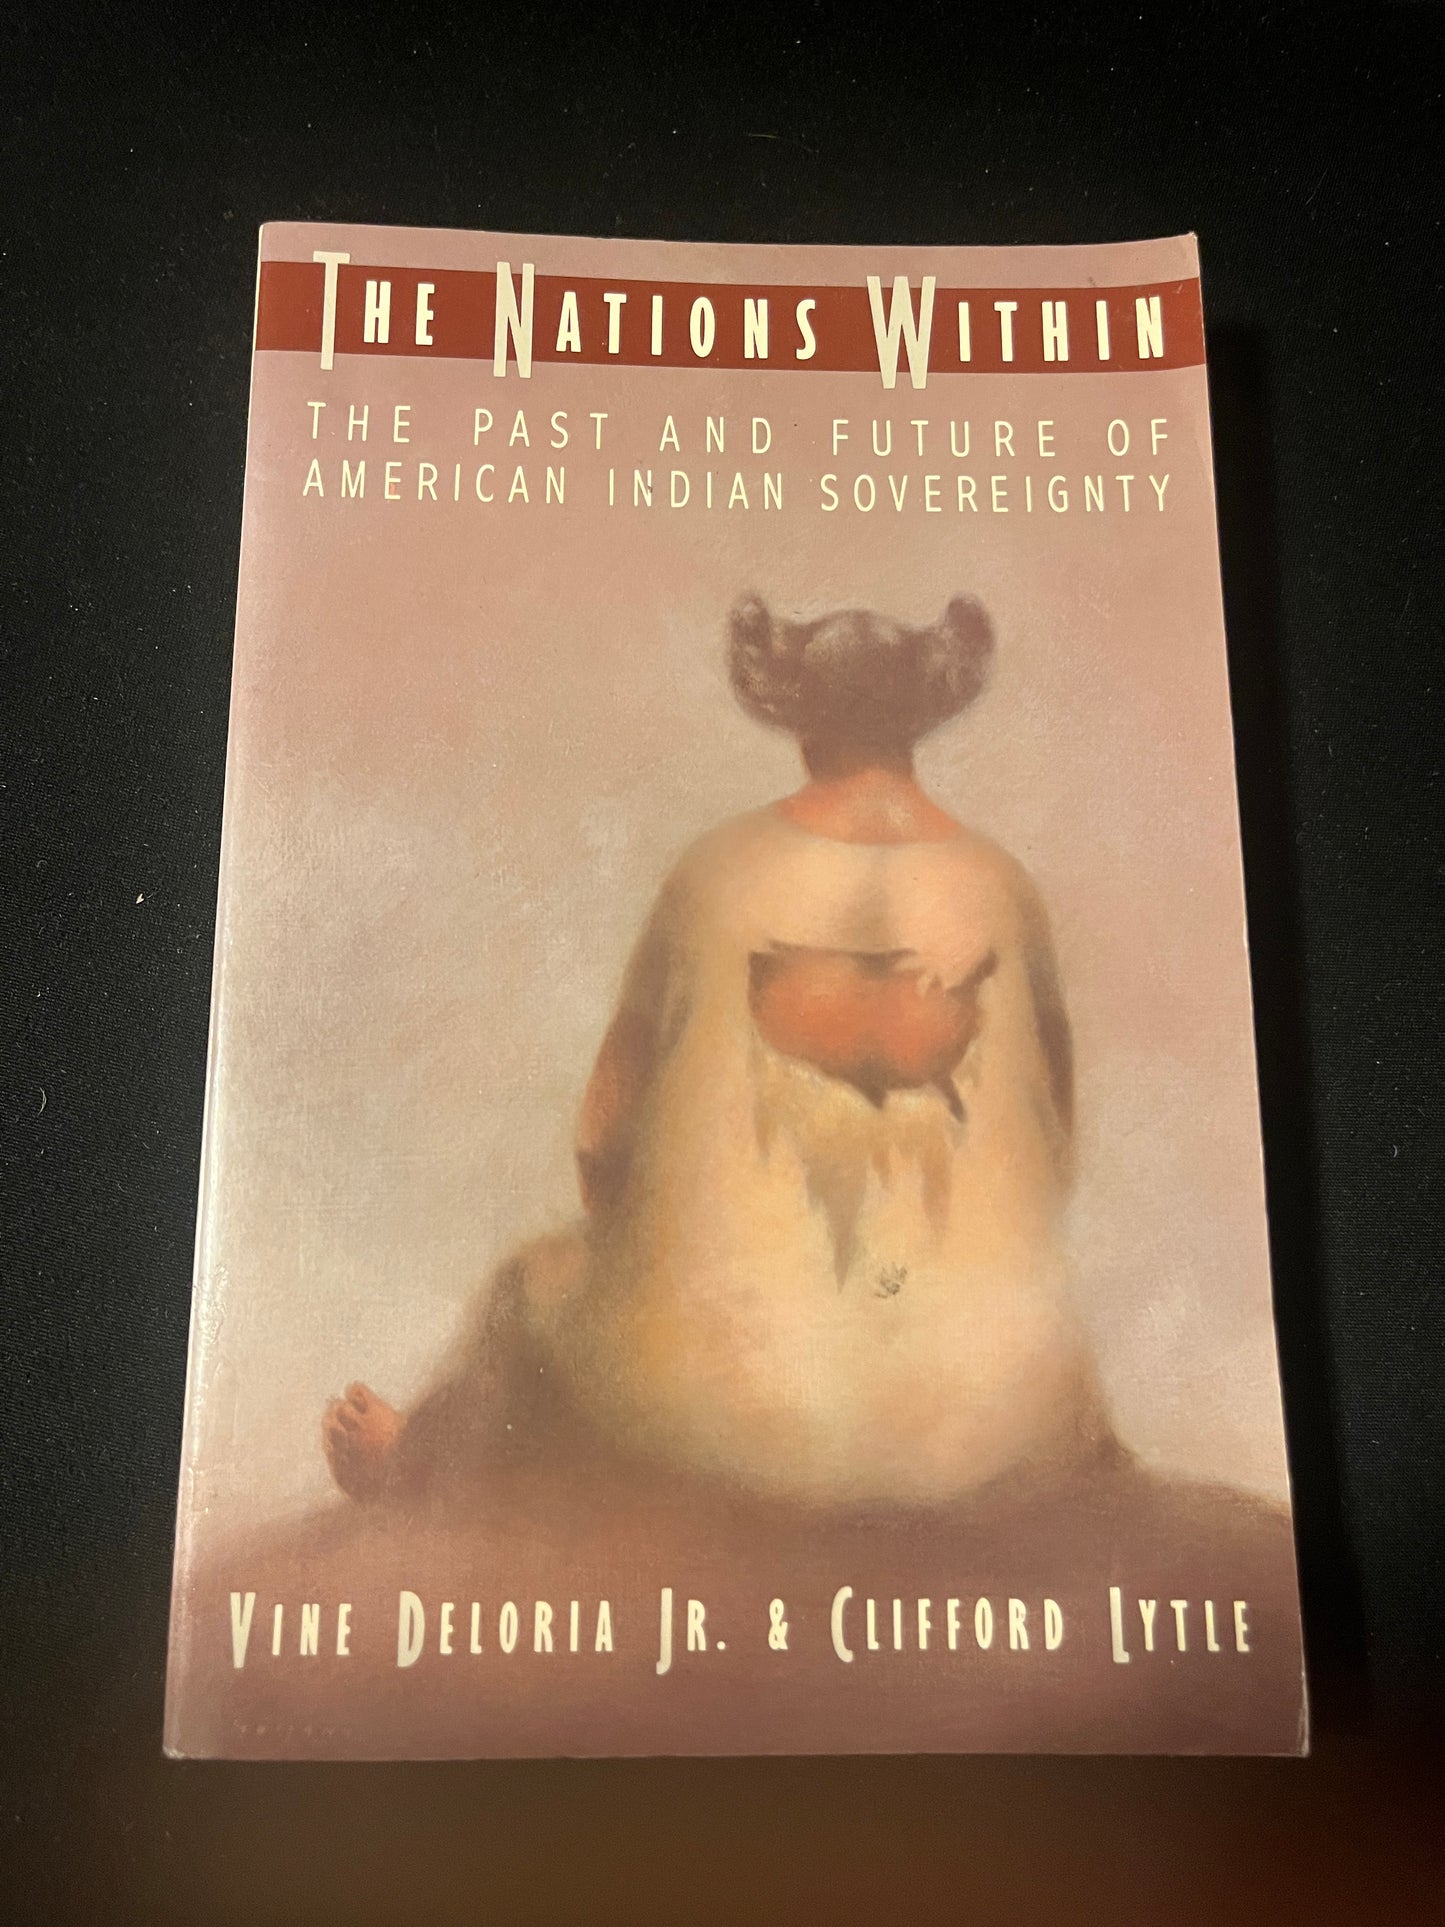 THE NATIONS WITHIN: THE PAST AND FURTURE OF AMERICAN INDIAN SOVEREIGNTY by Vine Deloria Jr. and Clifford Lytle